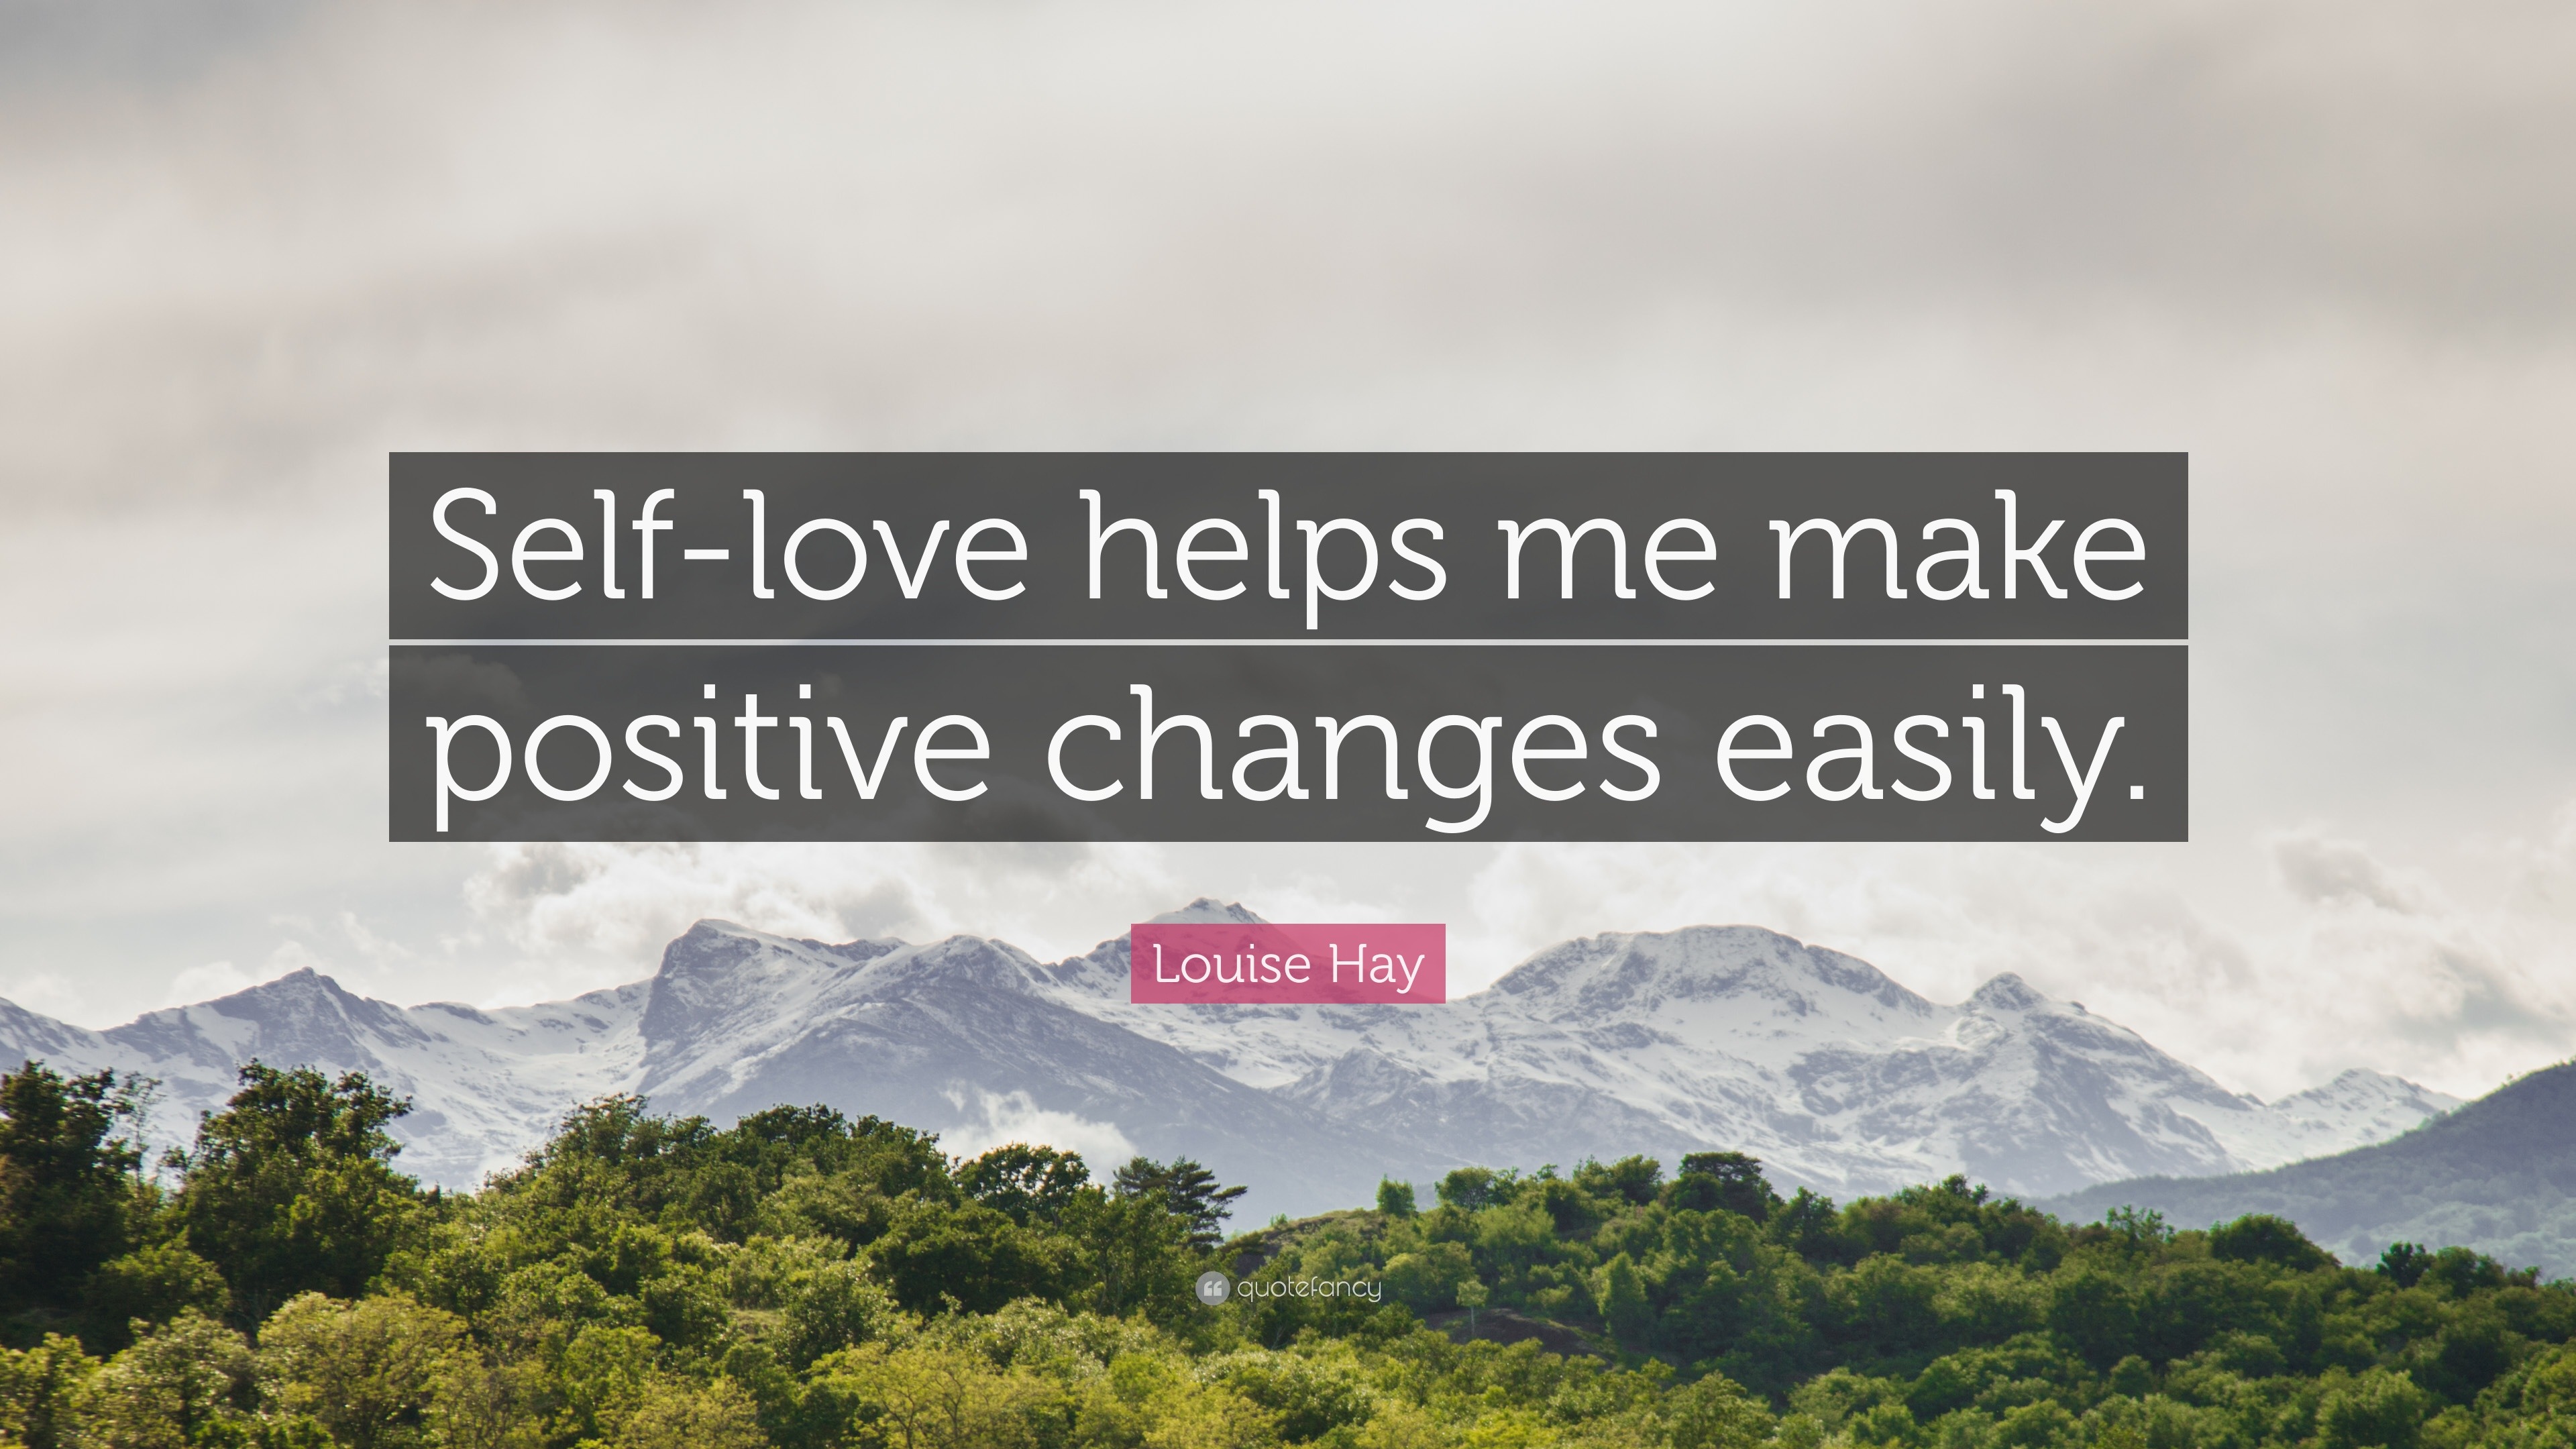 Trust Life Love Yourself Every Day with Wisdom from Louise Hay